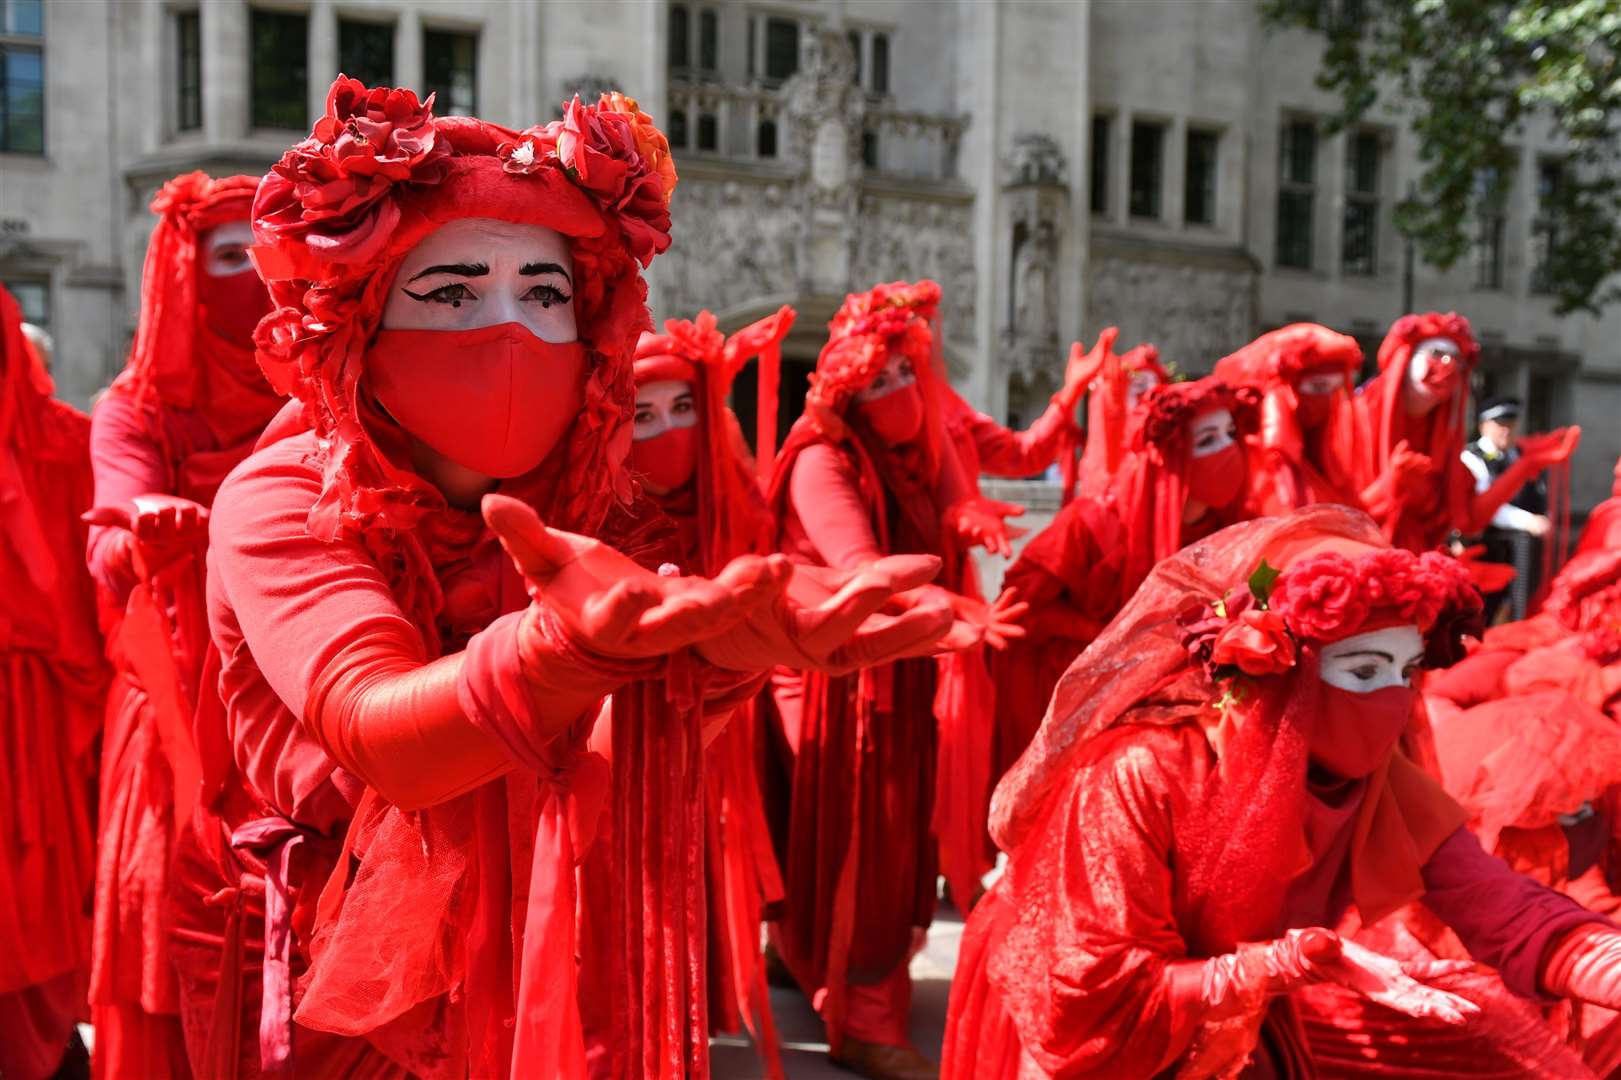 Members of the Red Brigade take part in an Extinction Rebellion demonstration (Dominic Lipinski/PA)